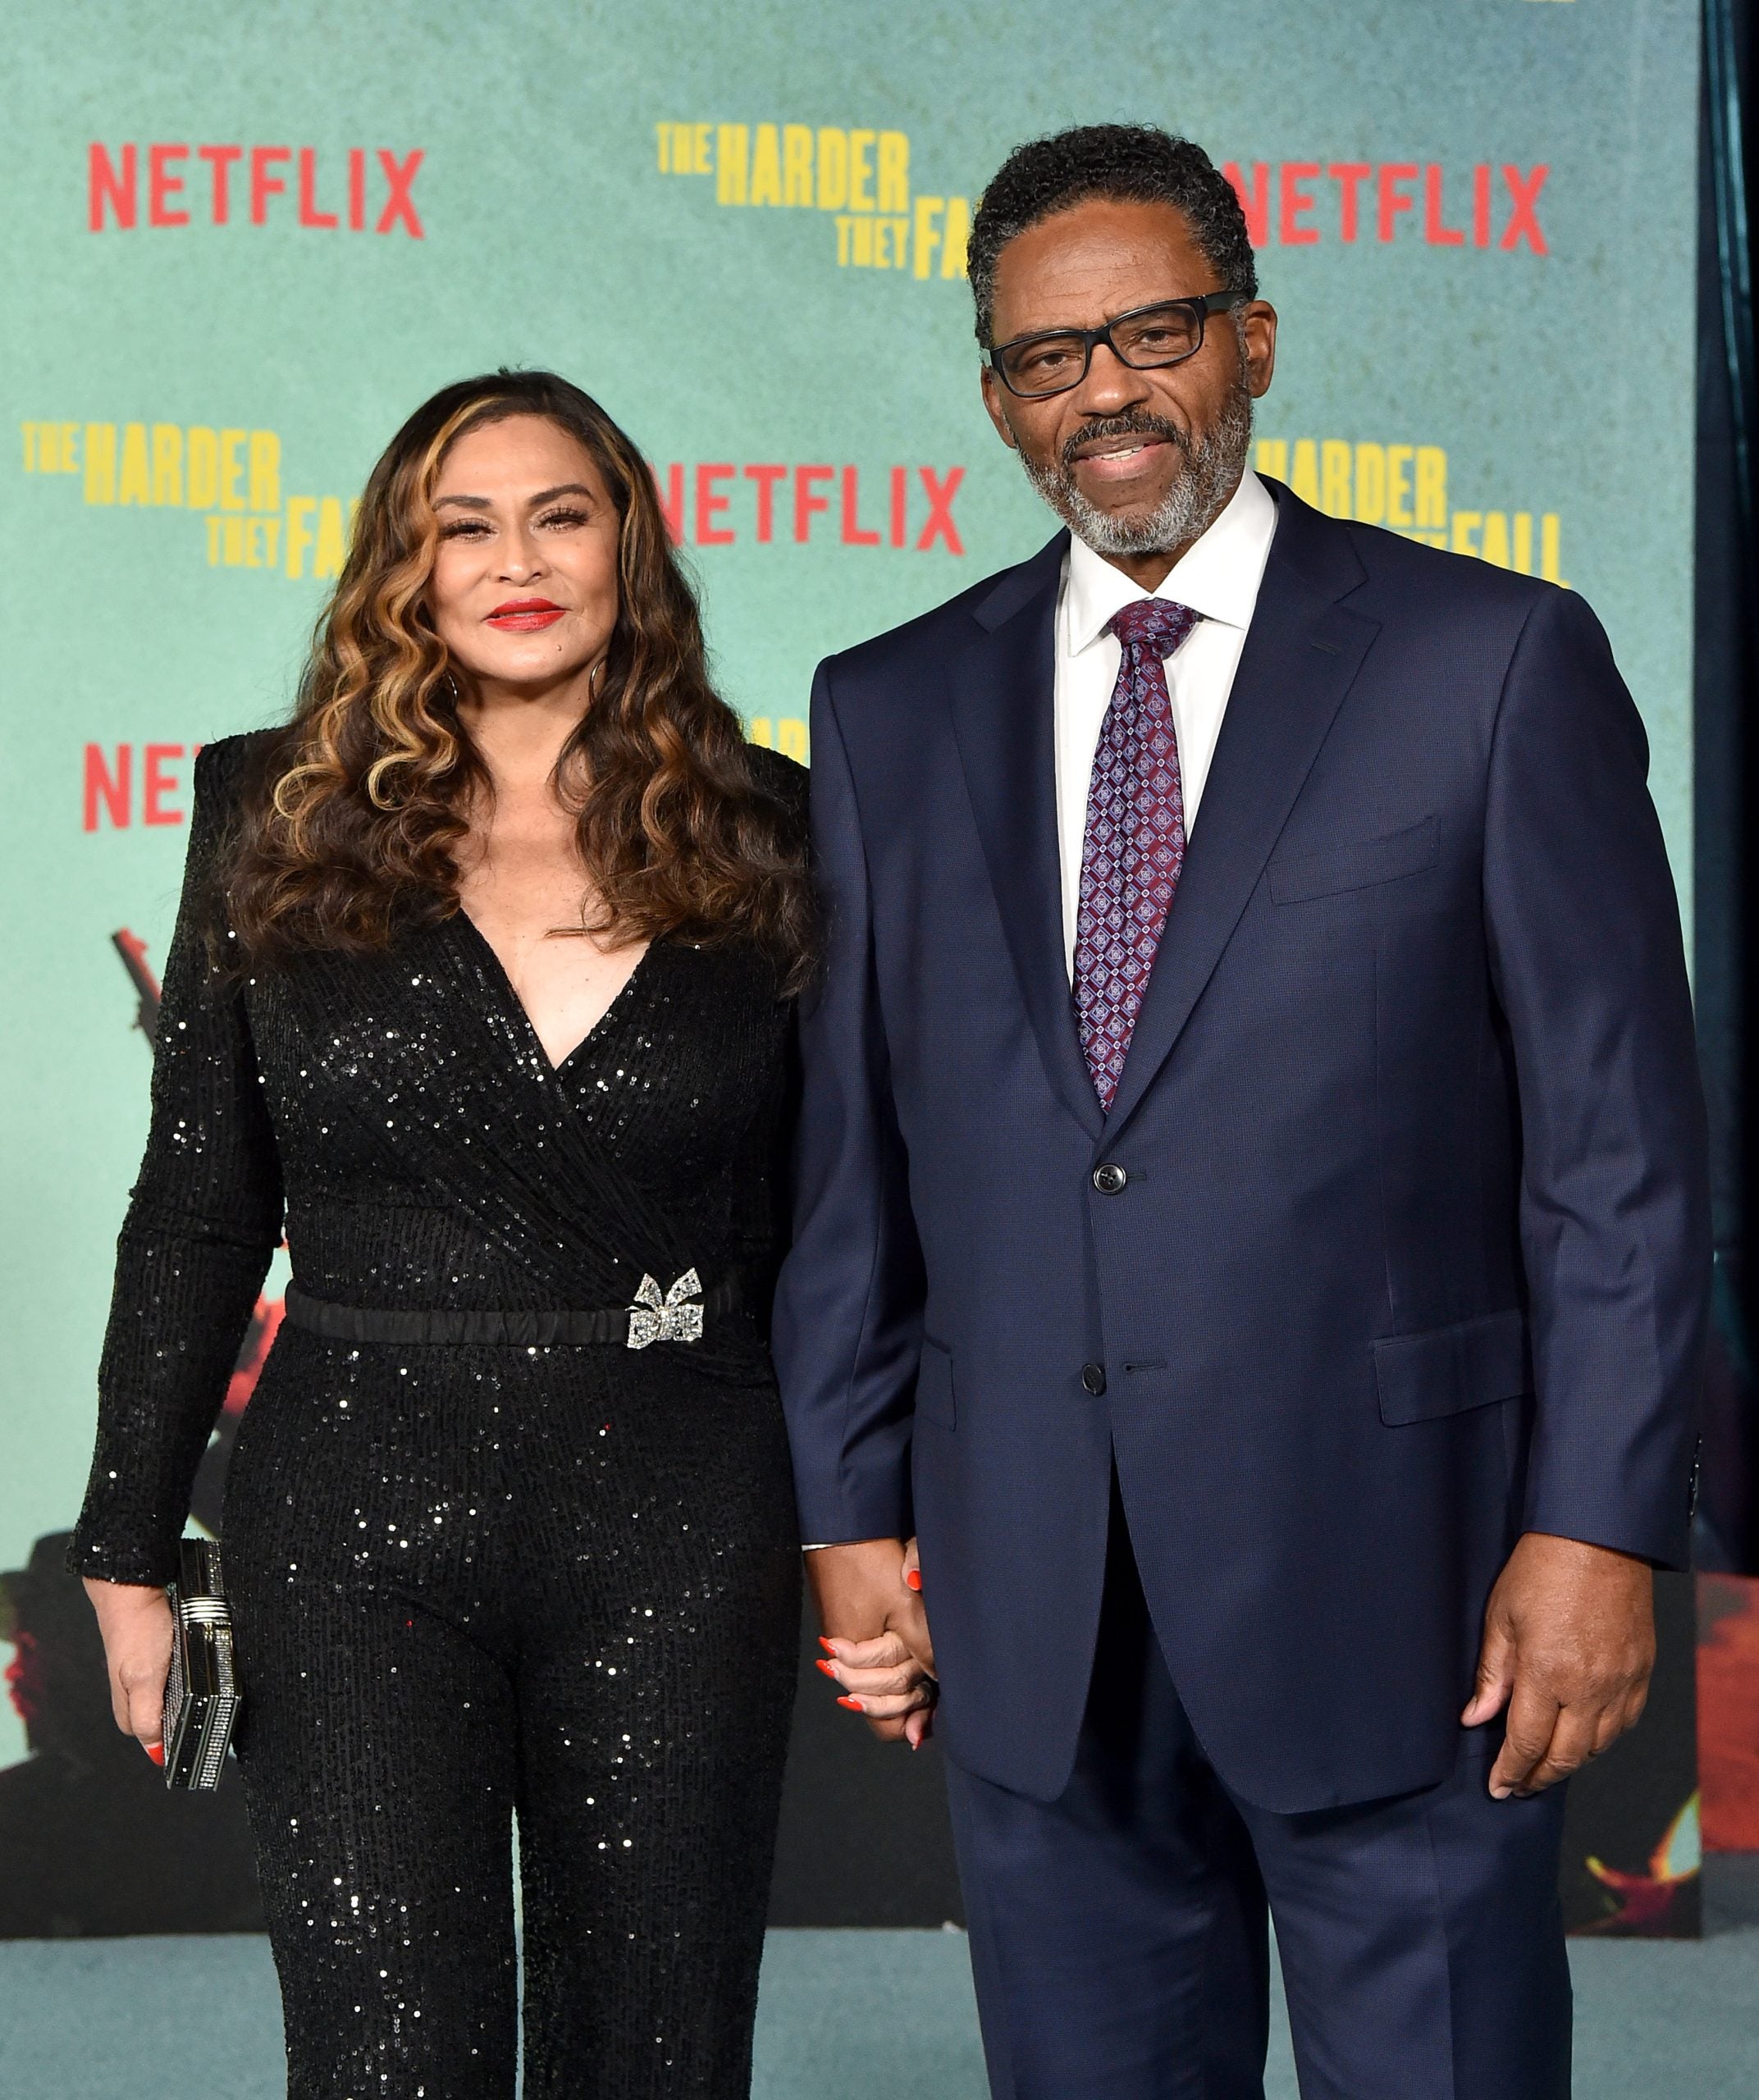 Tina Knowles And Richard Lawson To Divorce After 8 Years Of Marriage: A Timeline Of Their Relationship